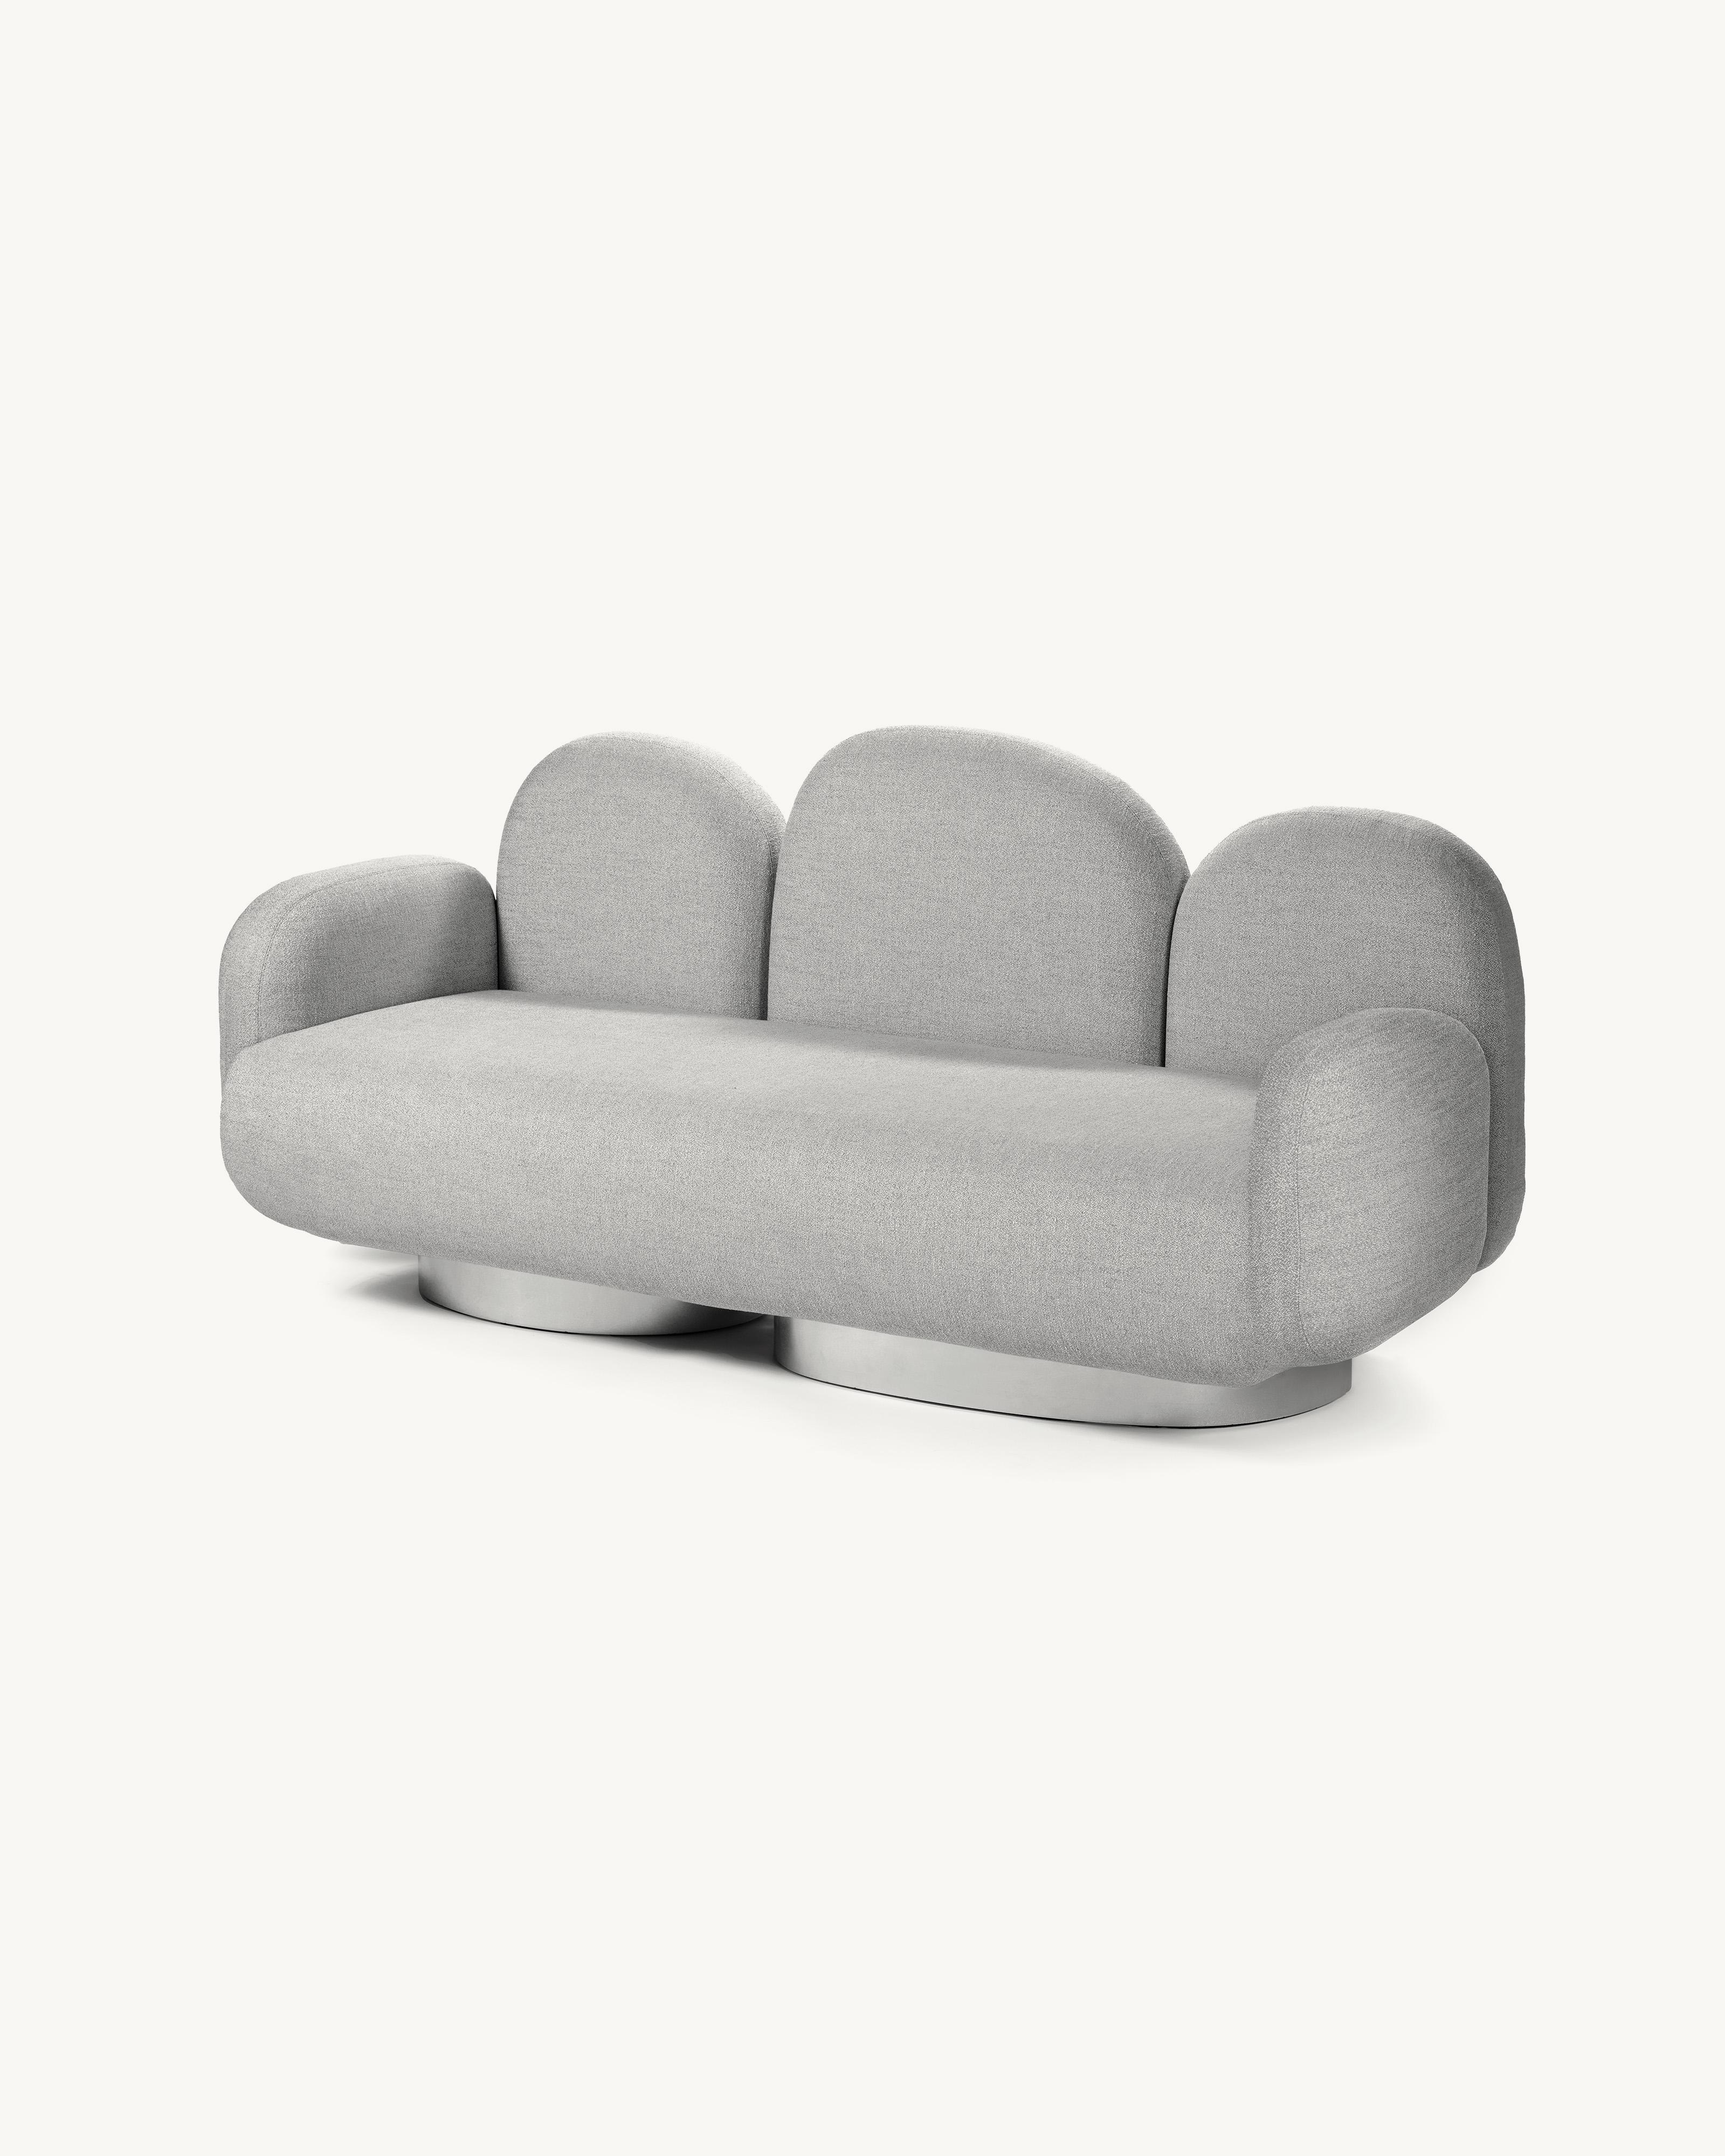 Belgian Contemporary Sofa 'Assemble' by Destroyers/Builders, 2 seaters + 2 armrests For Sale